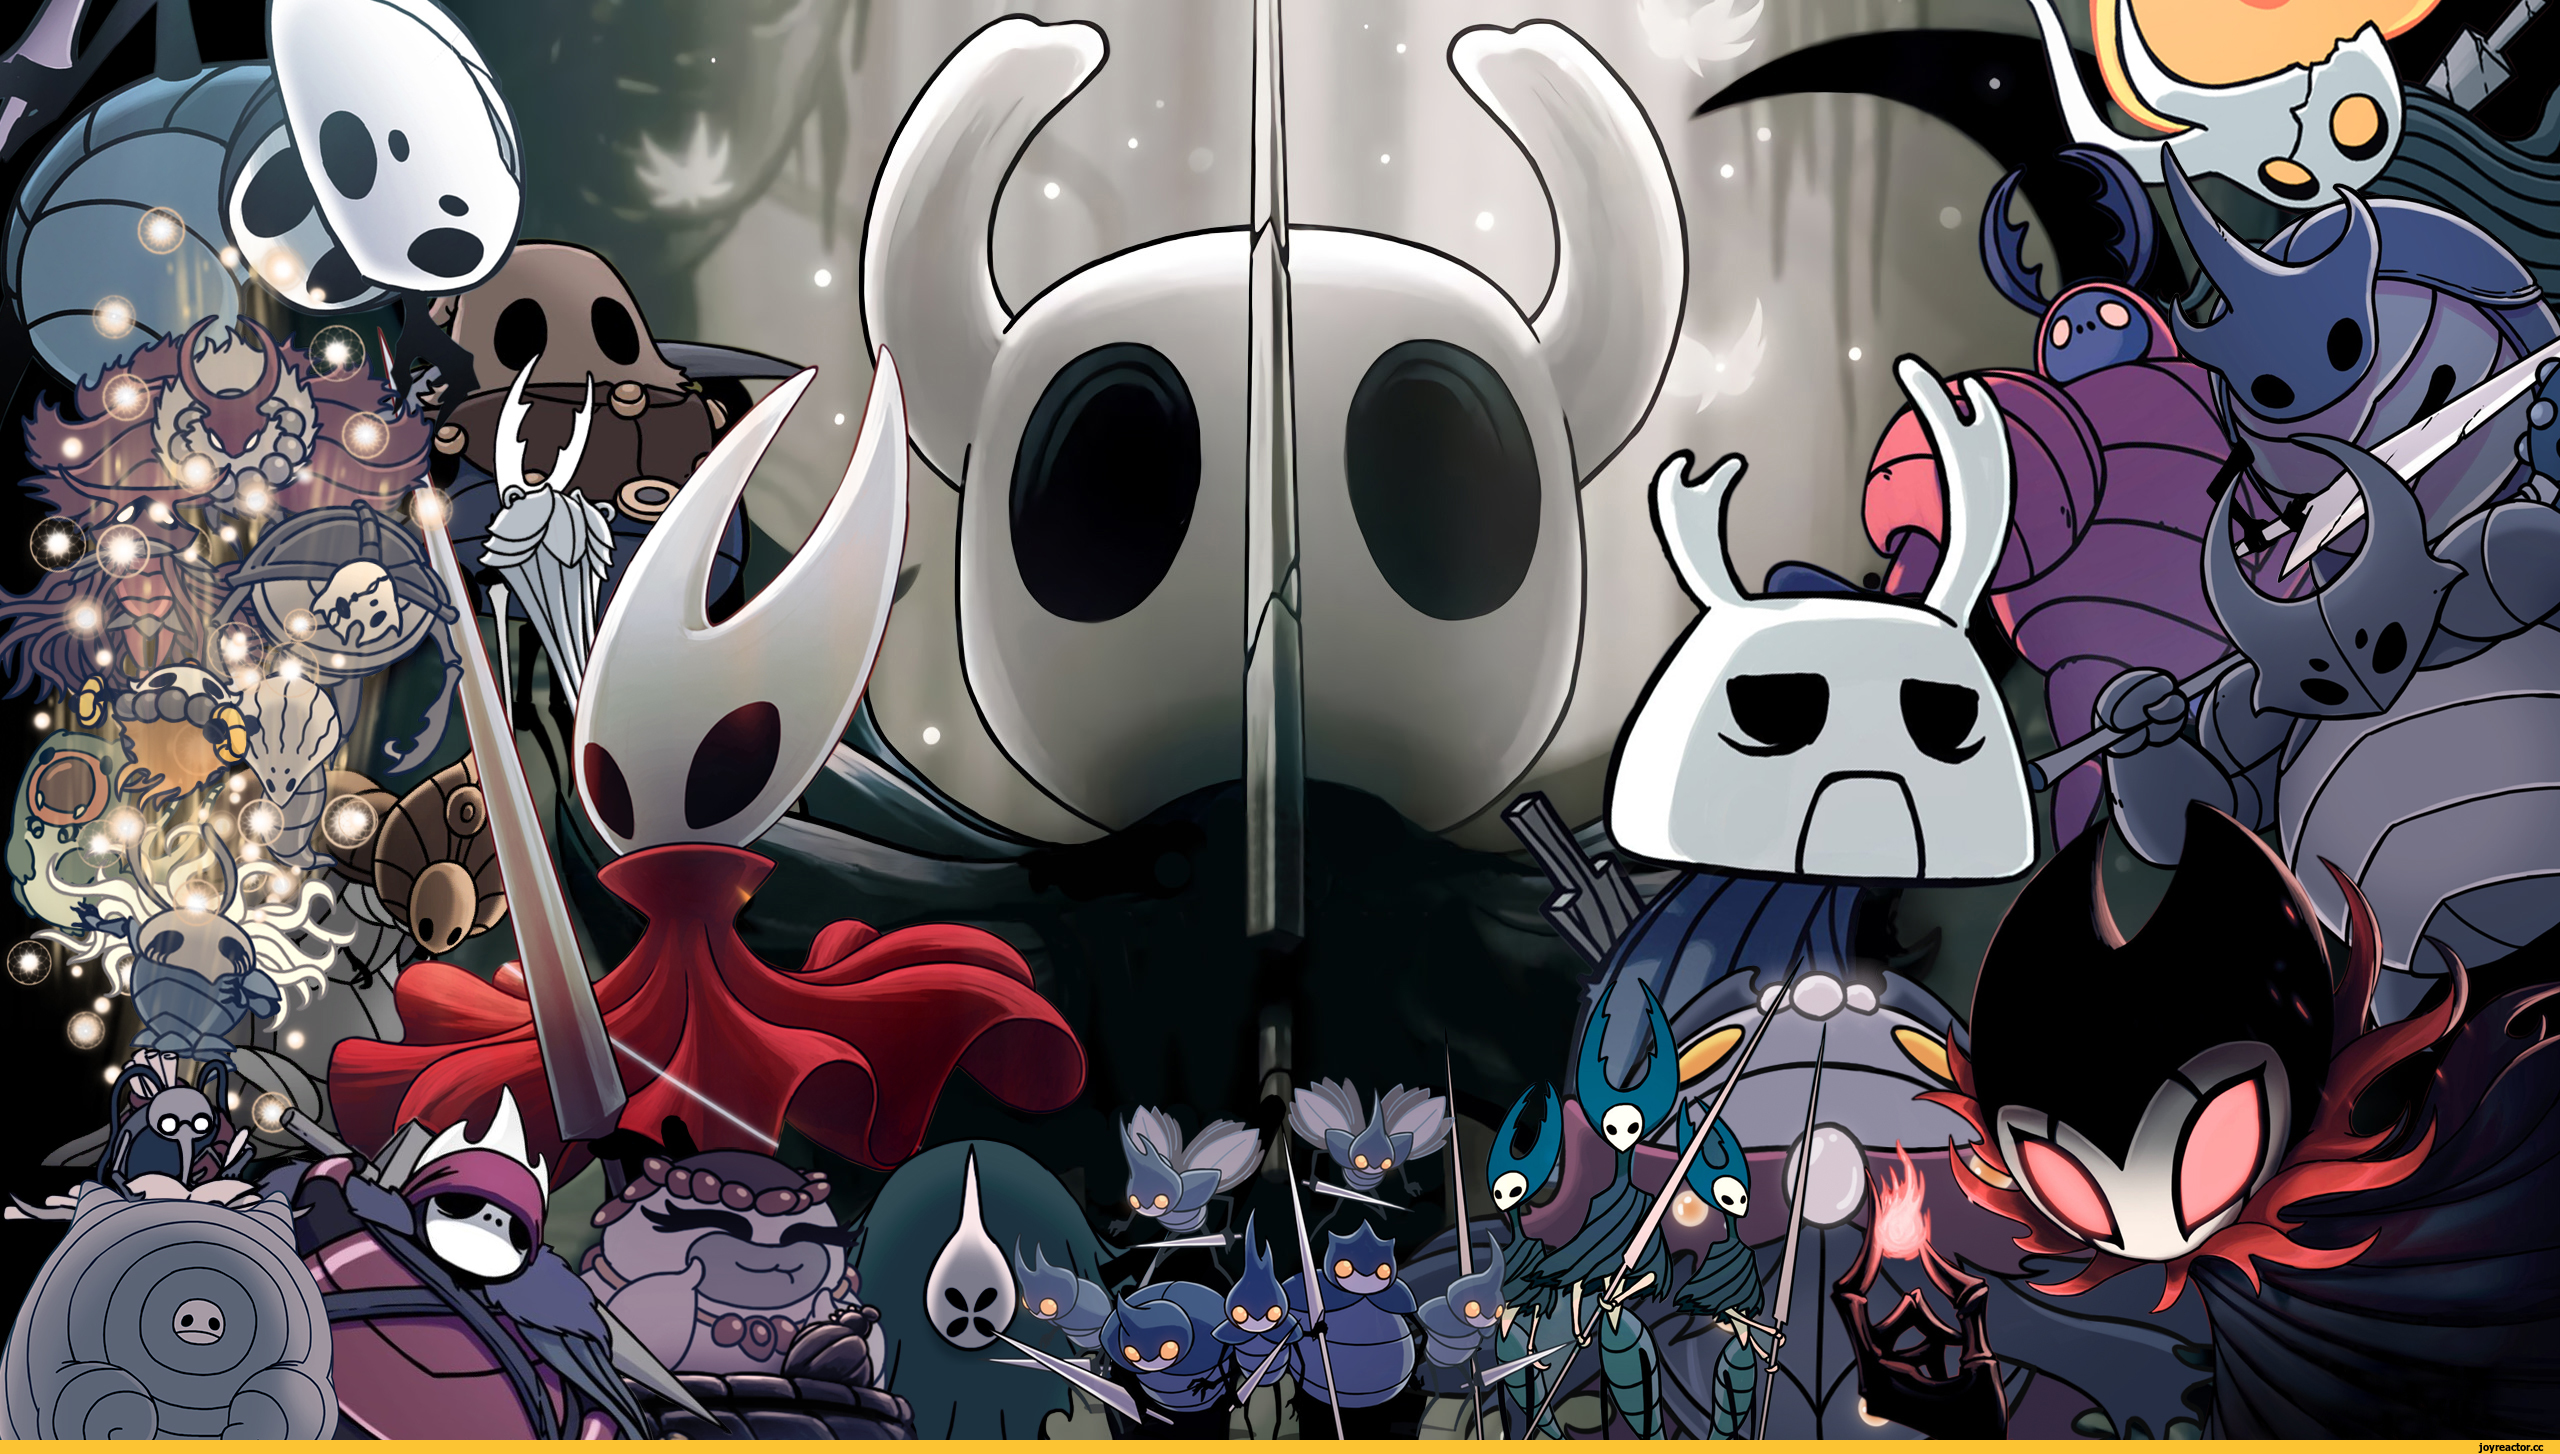 hollow knight free download windows